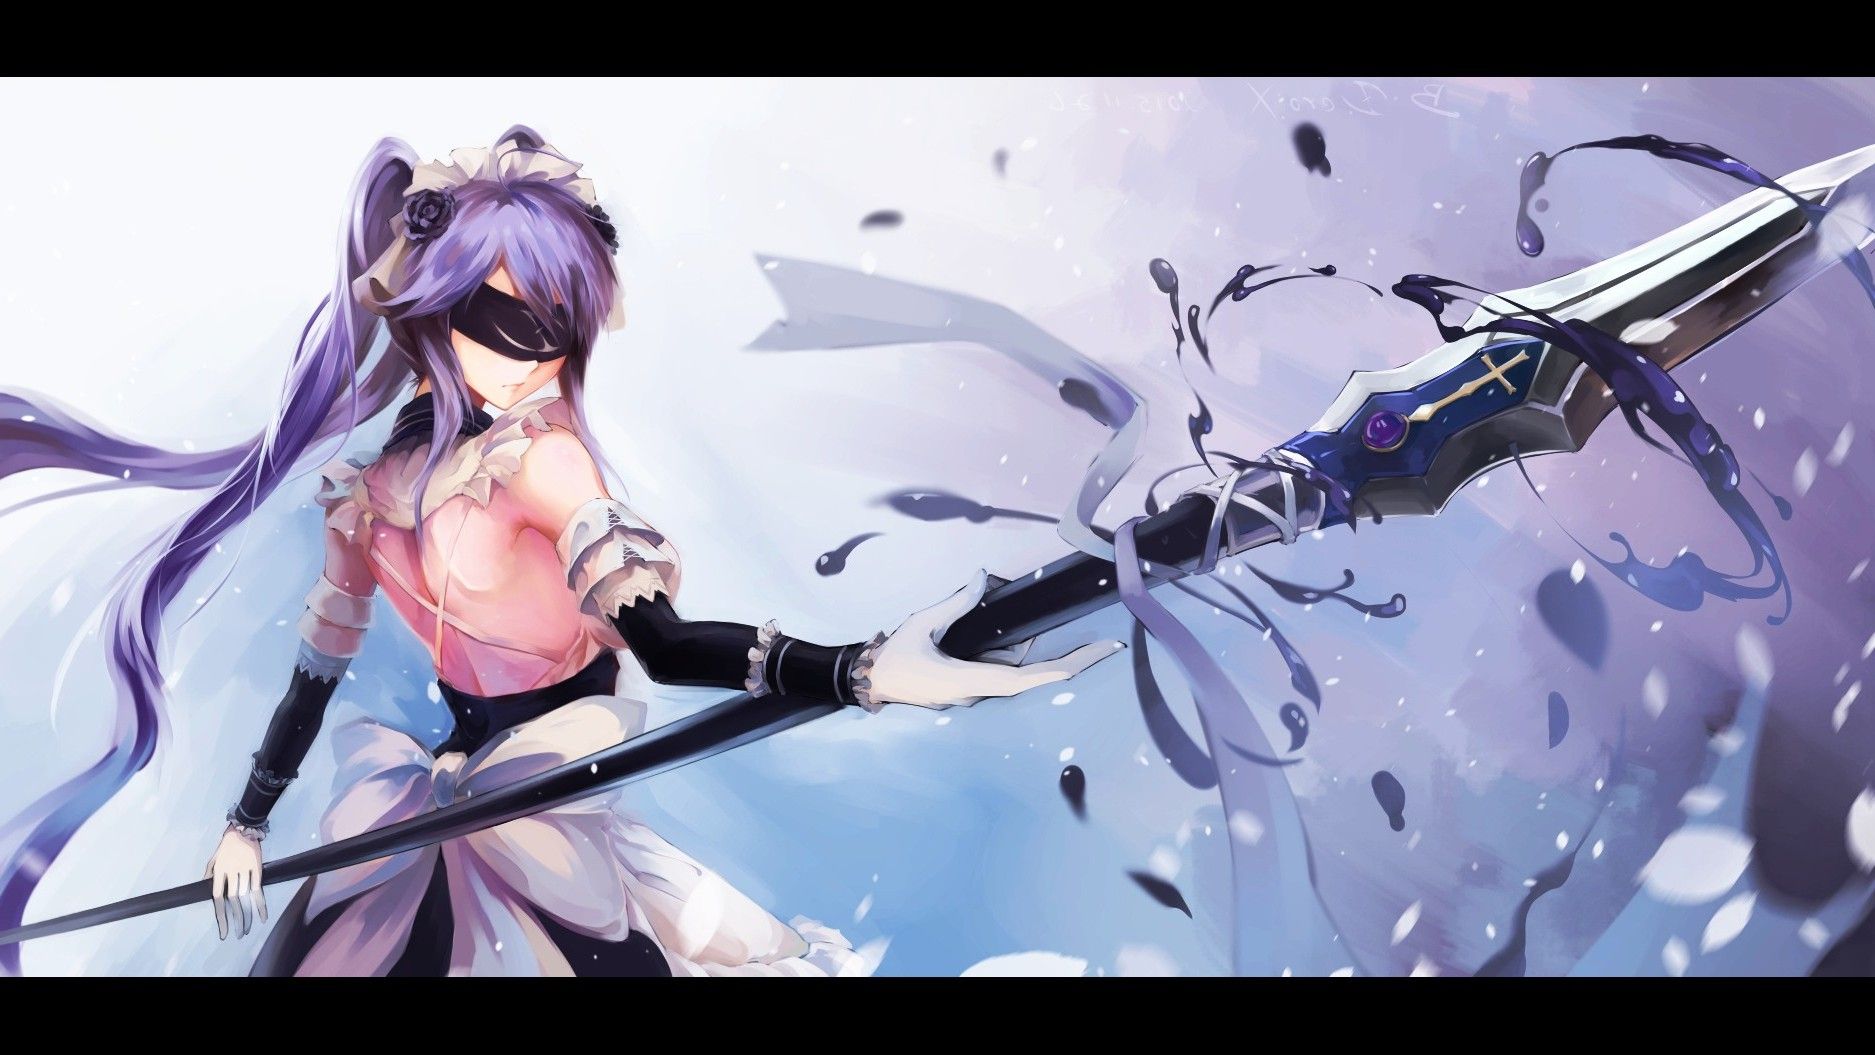 anime, Anime Girls, Blindfold, Spear, Weapon, Purple Hair, Twintails, Original Characters Wallpaper HD / Desktop and Mobile Background